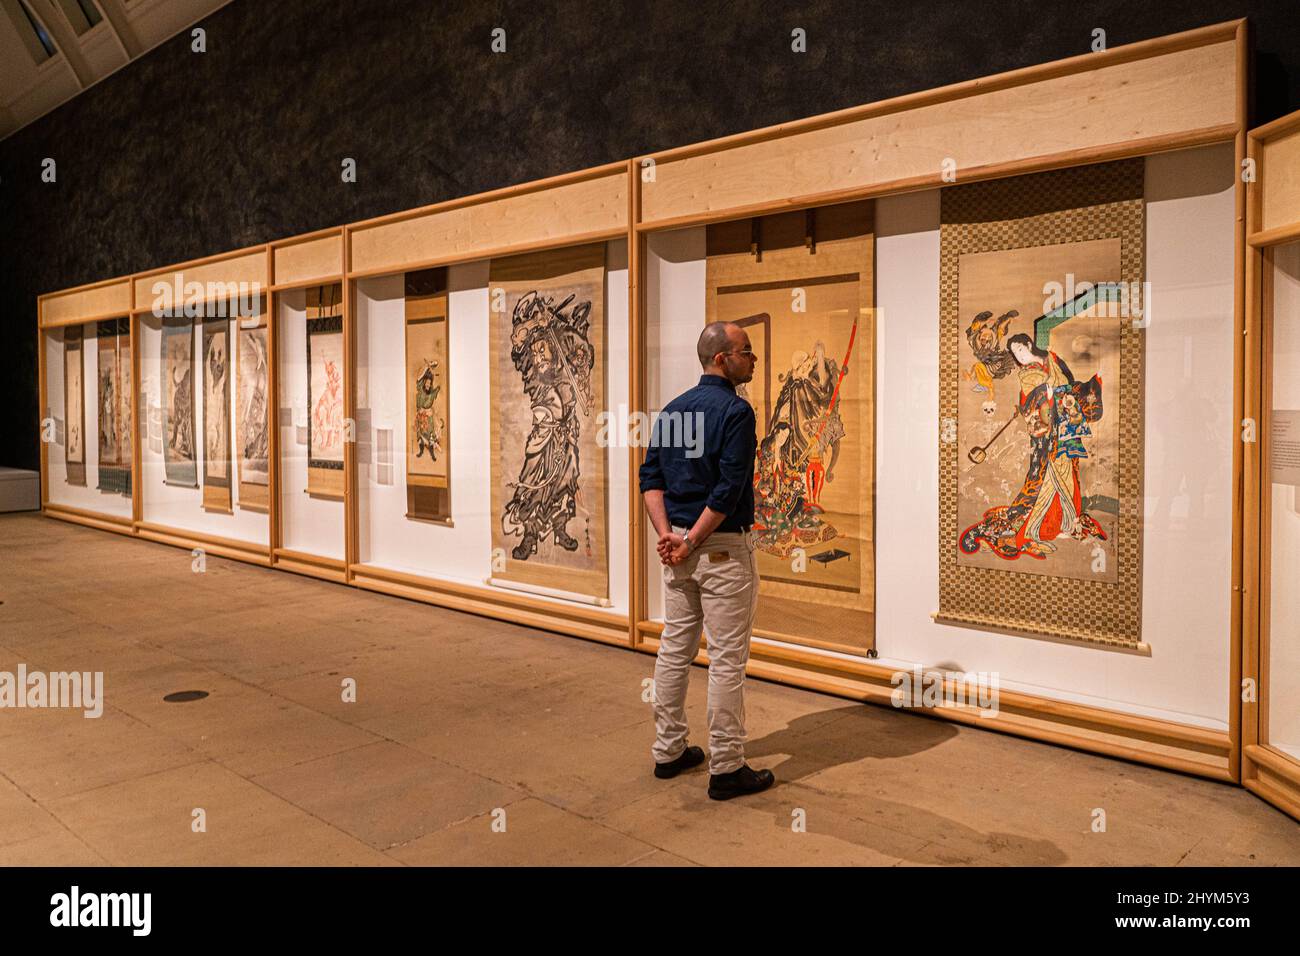 LONDON, UK. 15  March, 2022 . Works by KAWANABE KYŌSAI. The First UK solo exhibition by Japanese artist Kawanabe Kyōsai in almost 30 years at the Royal Academy as part of the Isareal Goldman collection. The exhibition runs from 19 March-19 June 2022. Credit: amer ghazzal/Alamy Live News Stock Photo